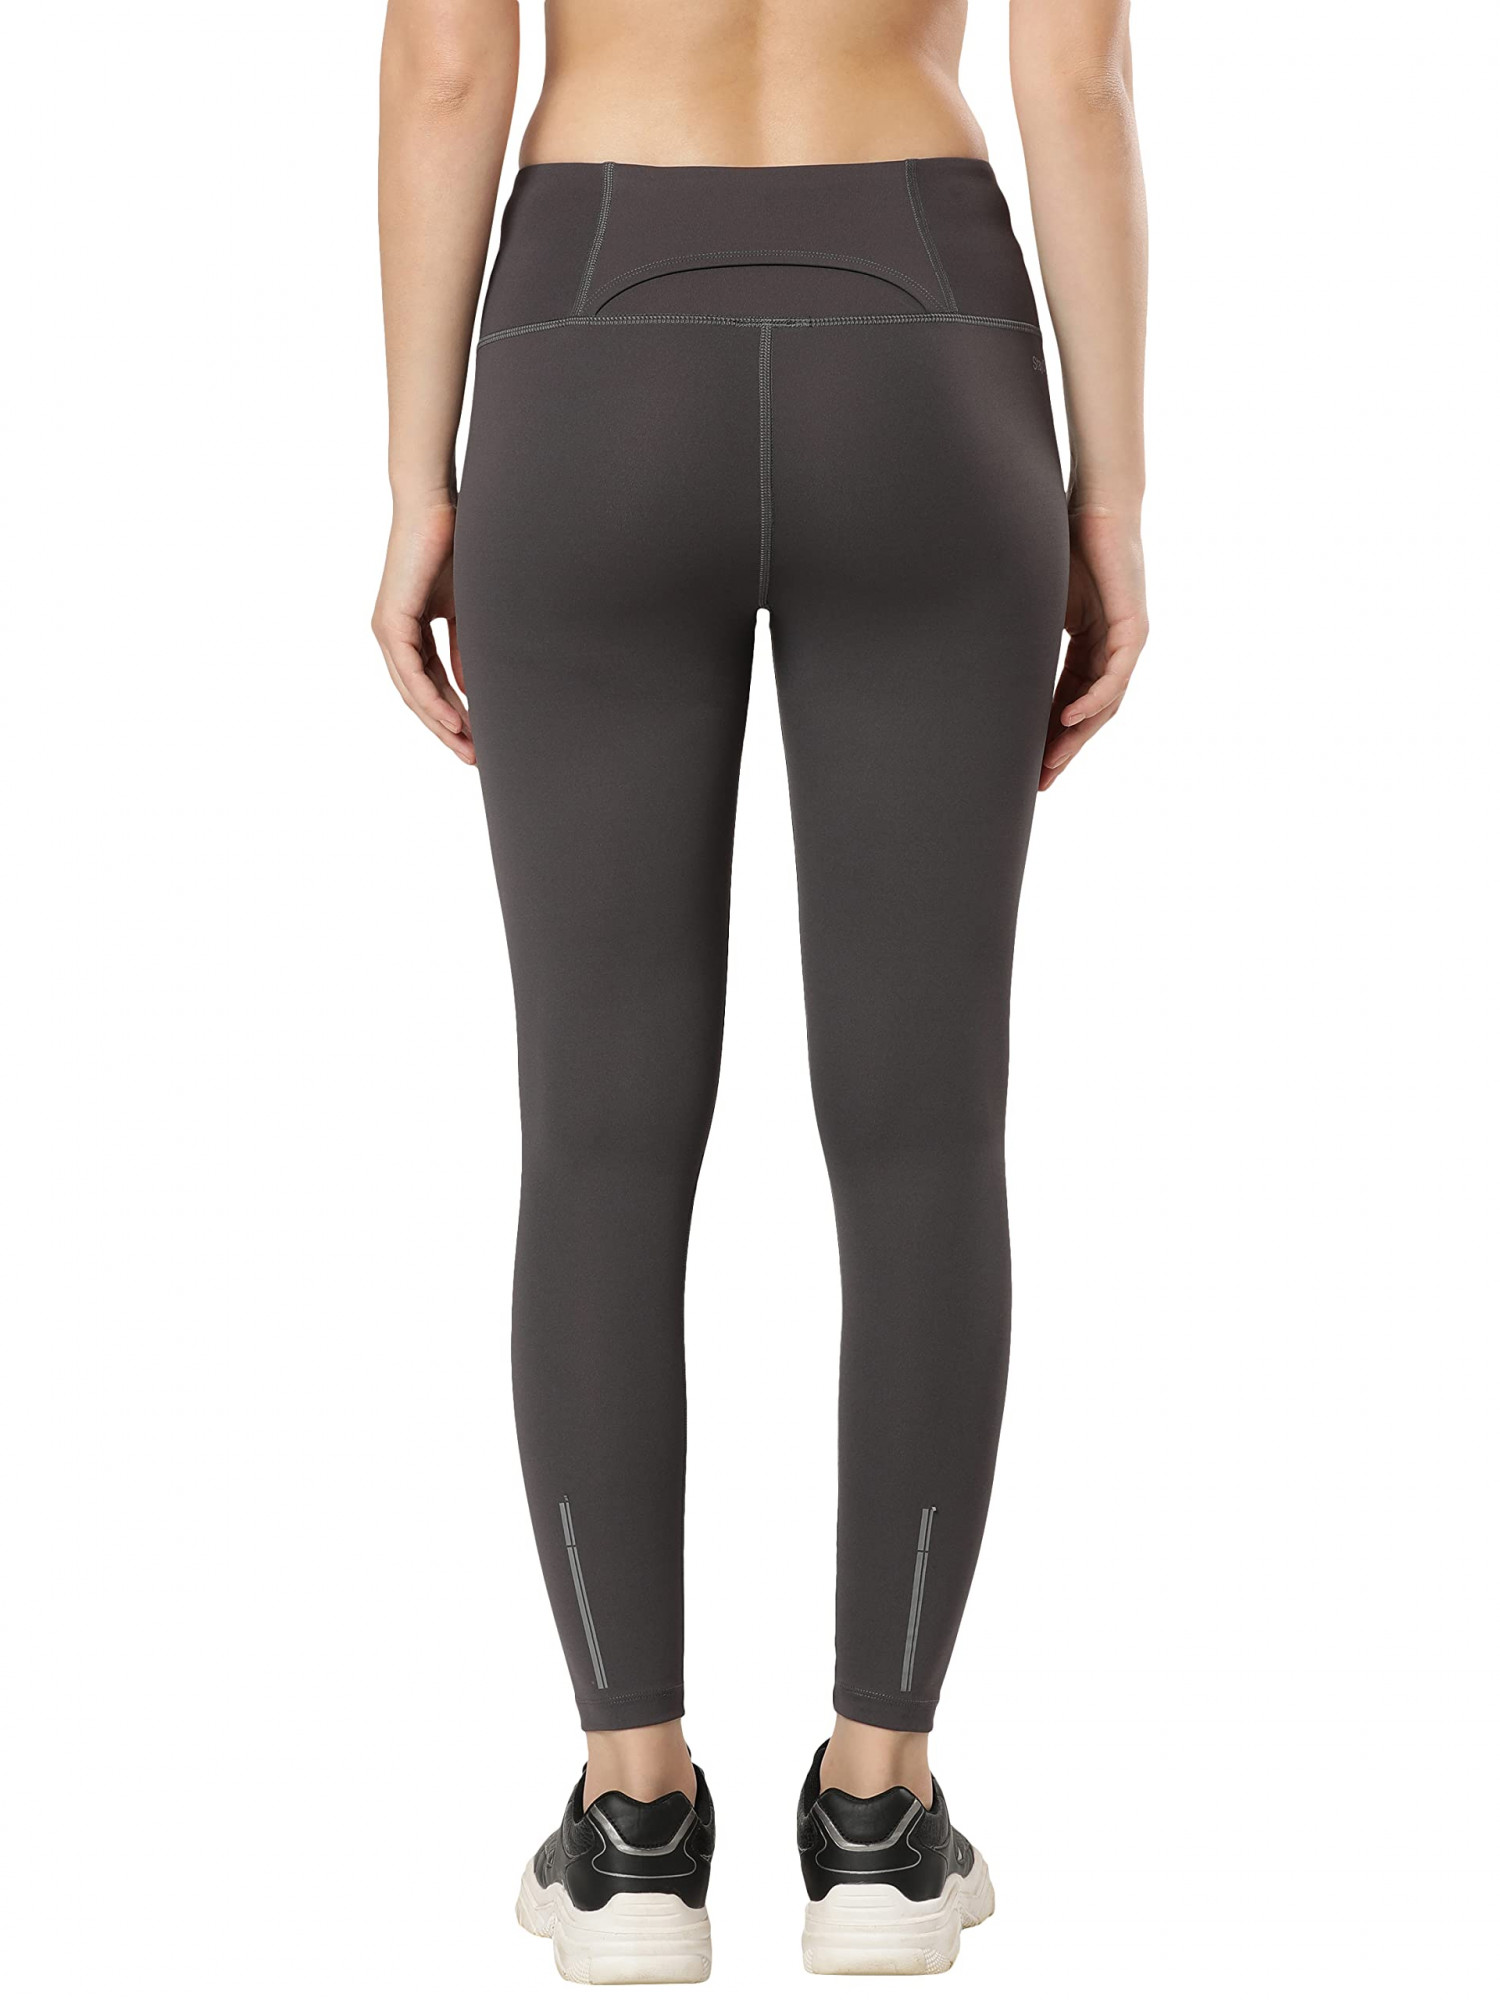 https://www.fastemi.com/uploads/fastemicom/products/jockey-womenamp039s-microfiber-elastane-stretch-performance-78th-leggings-with-back-waistband-pocket-and-stay-dry-technologystylemw68forged-ironssize-s-254028966947689_l.jpg